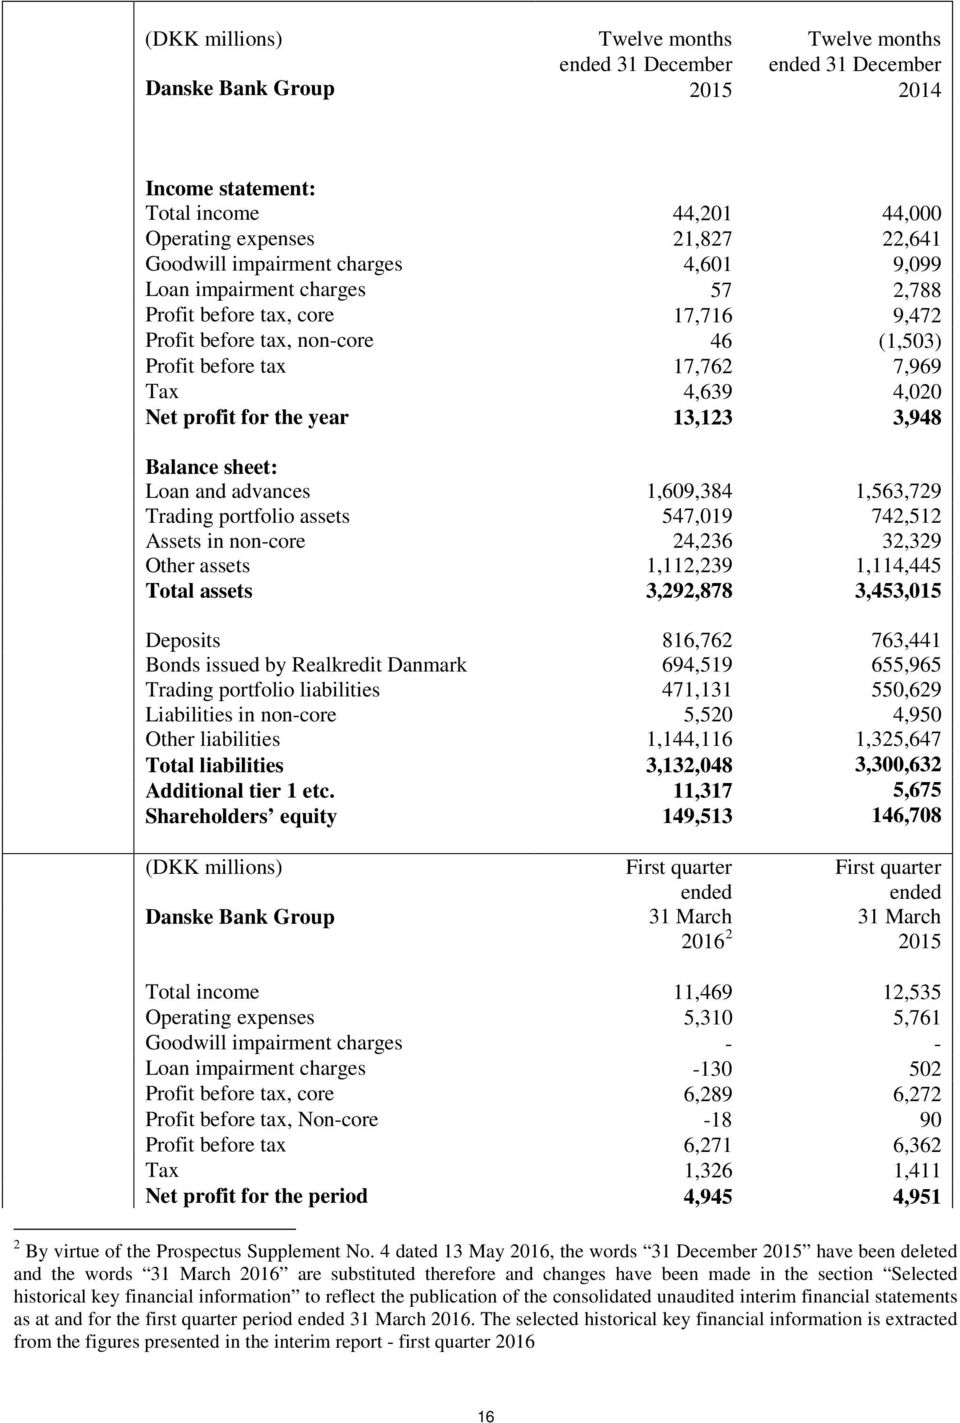 for the year 13,123 3,948 Balance sheet: Loan and advances 1,609,384 1,563,729 Trading portfolio assets 547,019 742,512 Assets in non-core 24,236 32,329 Other assets 1,112,239 1,114,445 Total assets